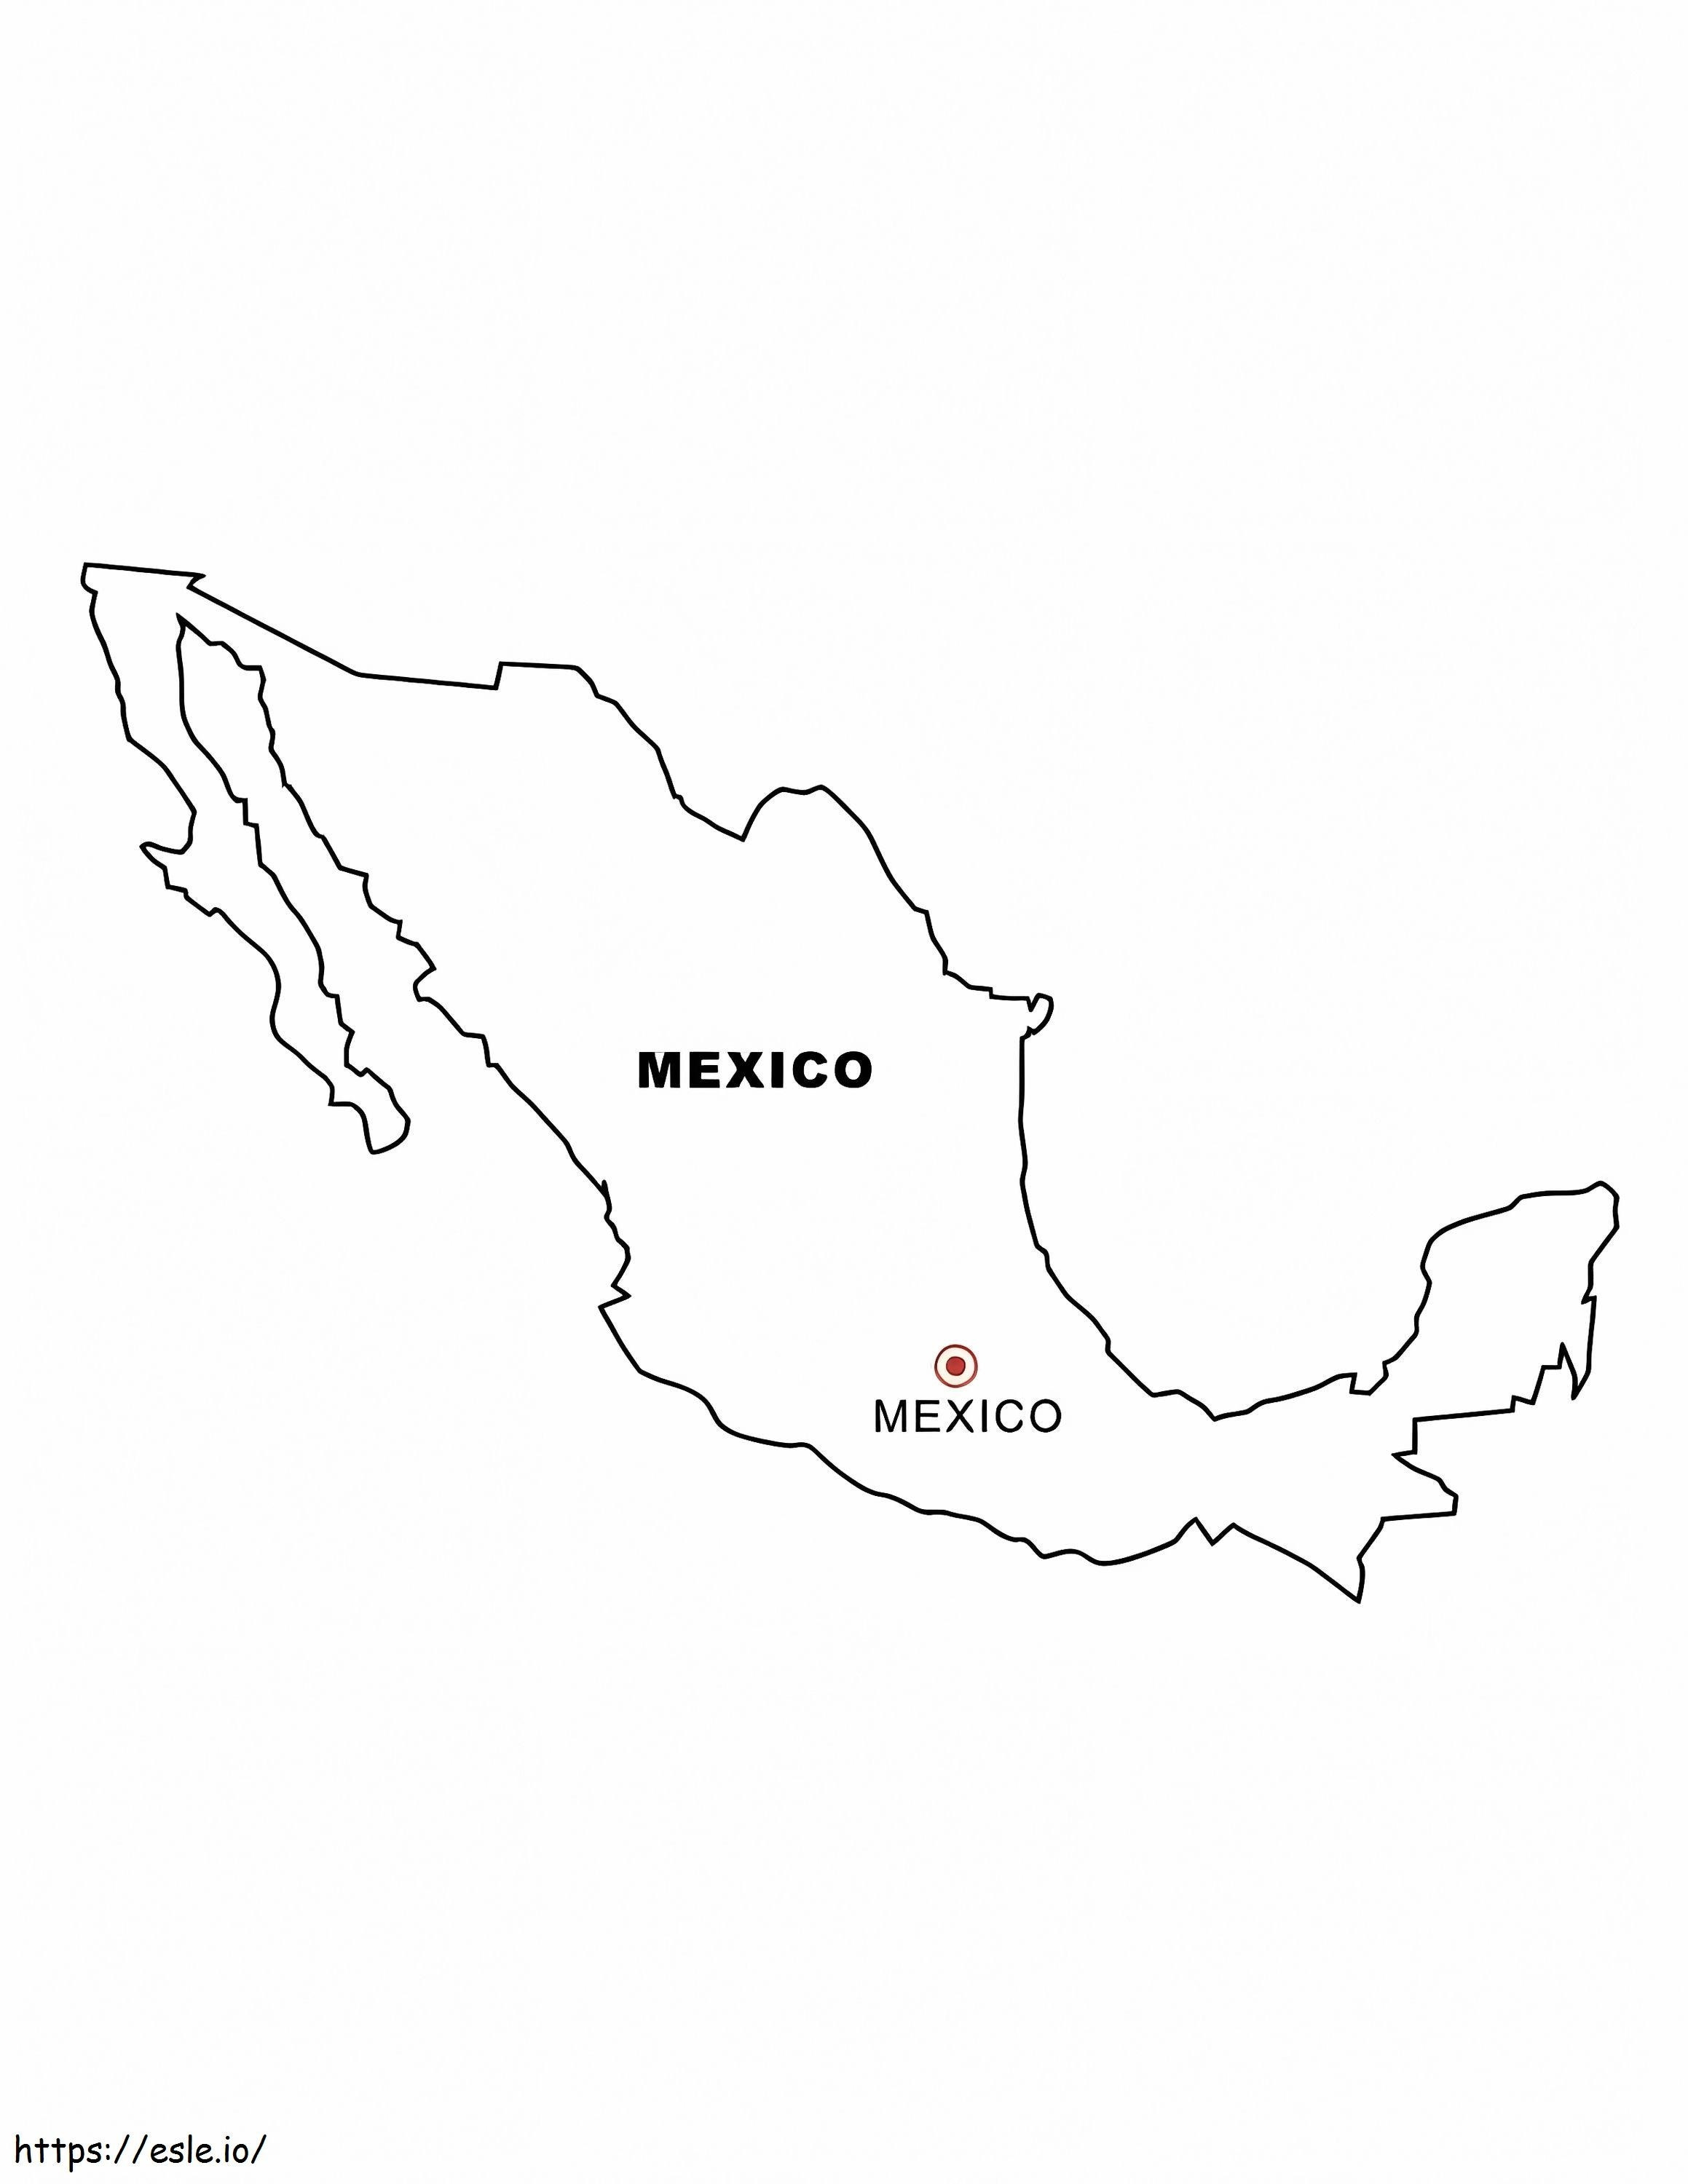 Mexico Map Coloring HD Image coloring page